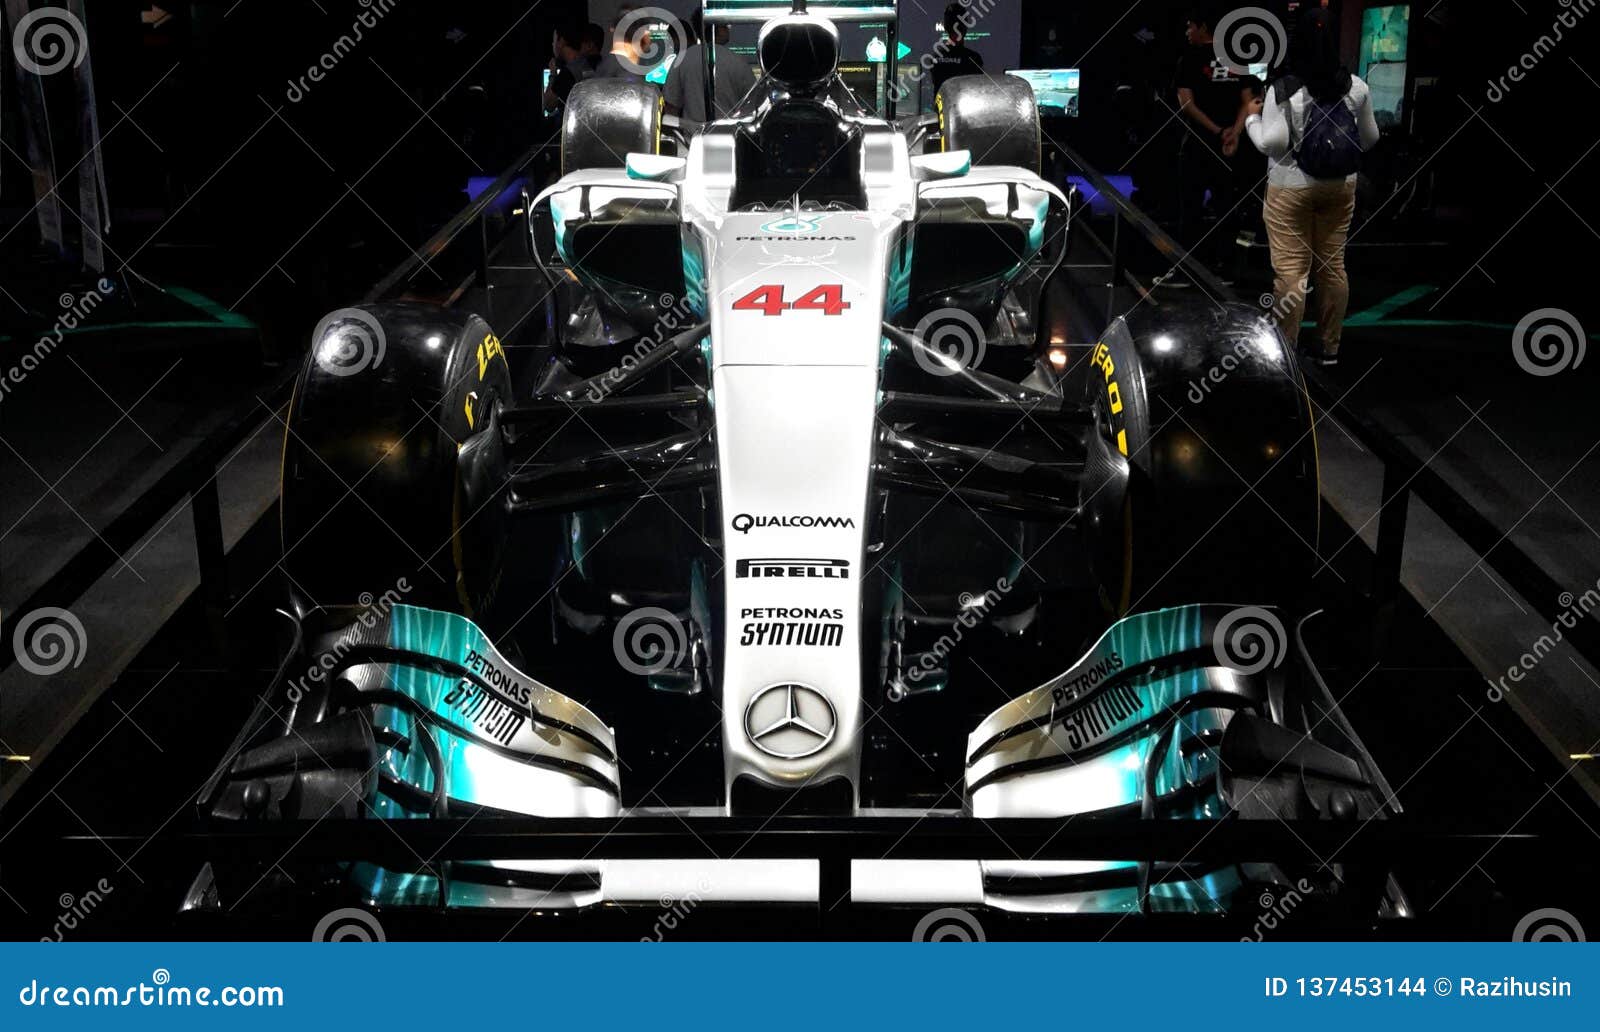 Turns into Removal The appliance The Mercedes AMG Petronas F1 Car, Driven by Lewis Hamilton 44, Displayed  during the Editorial Stock Image - Image of model, motor: 137453144